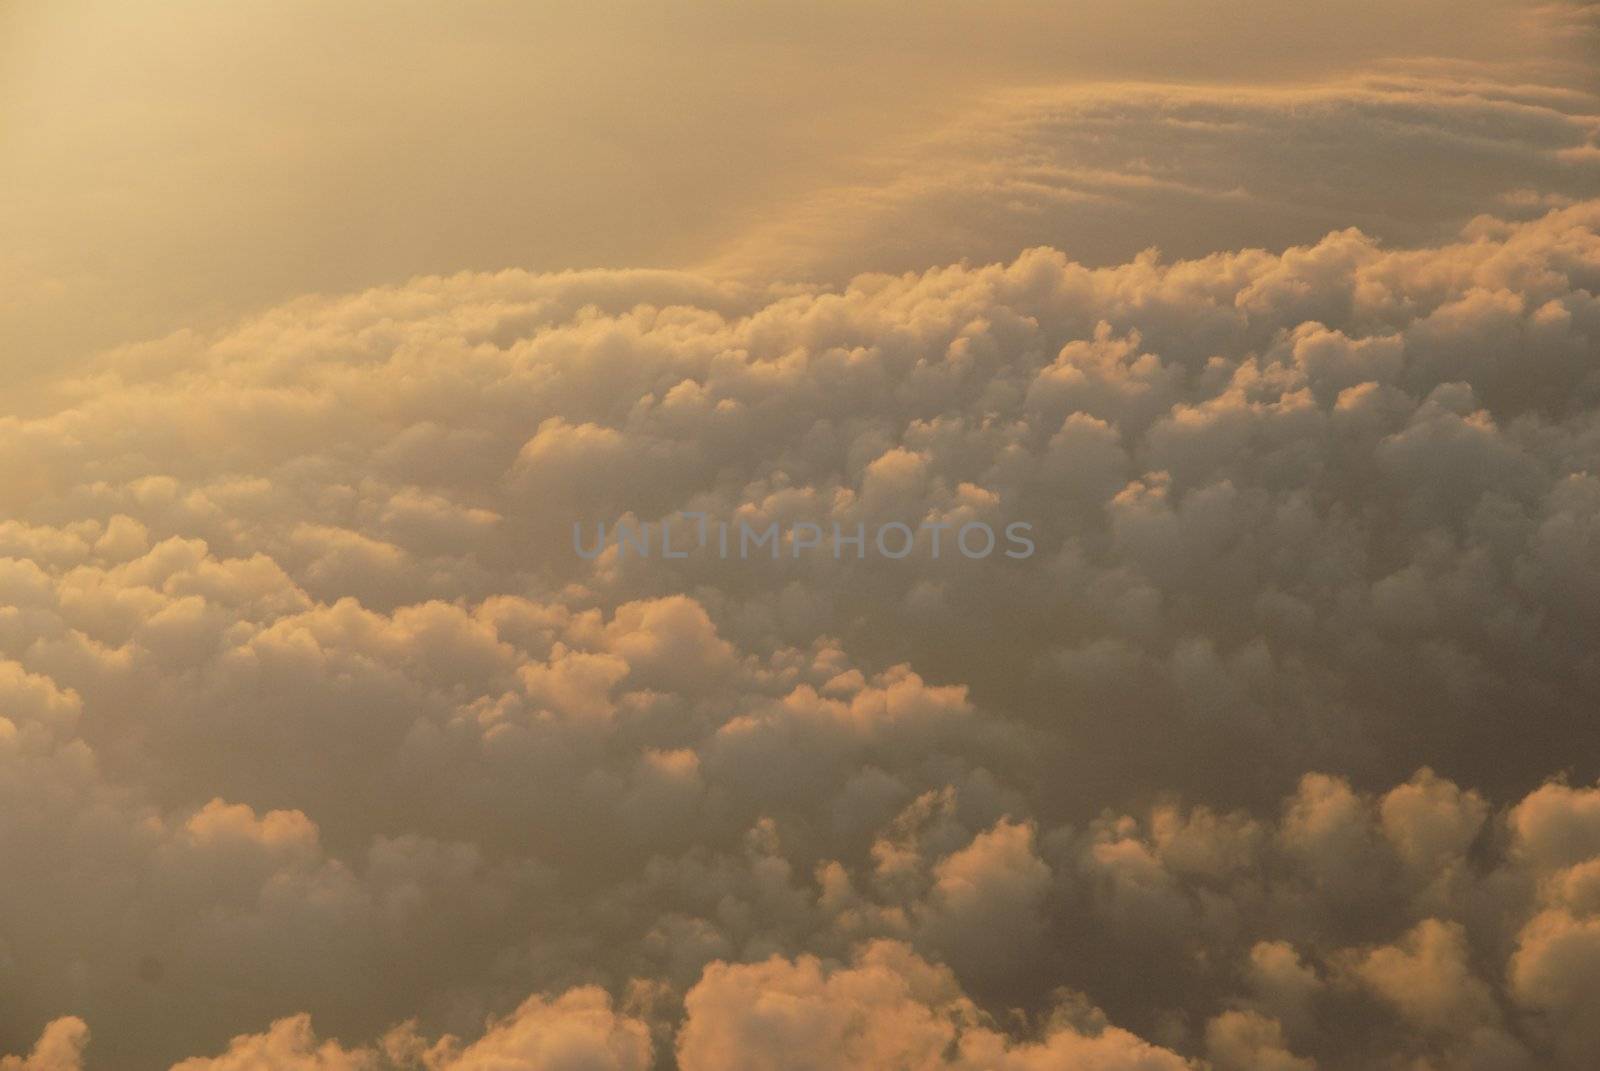 Looking DOWN at clouds from a jet